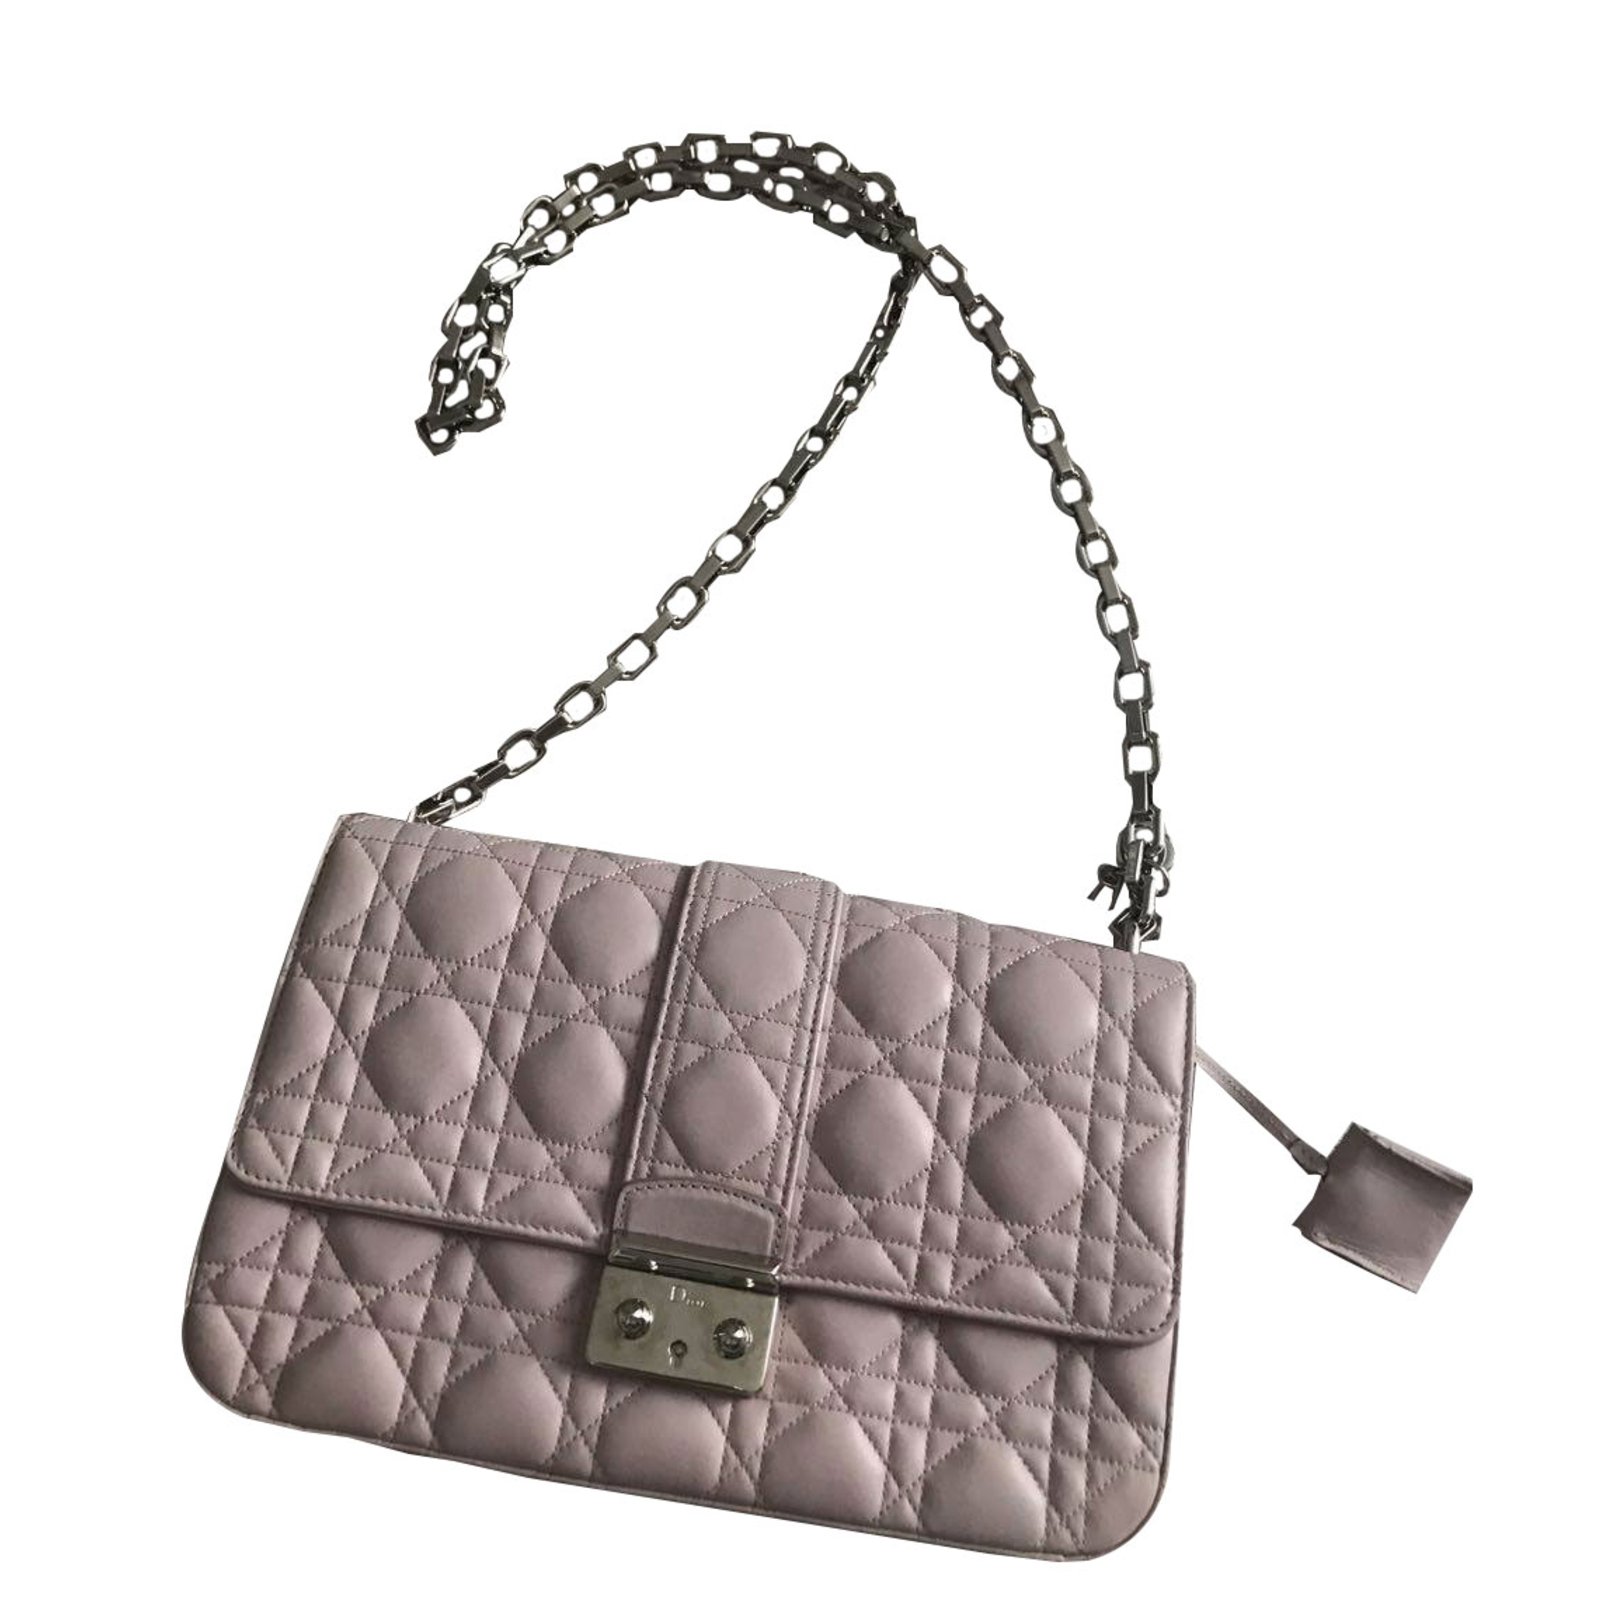 christian dior quilted bag